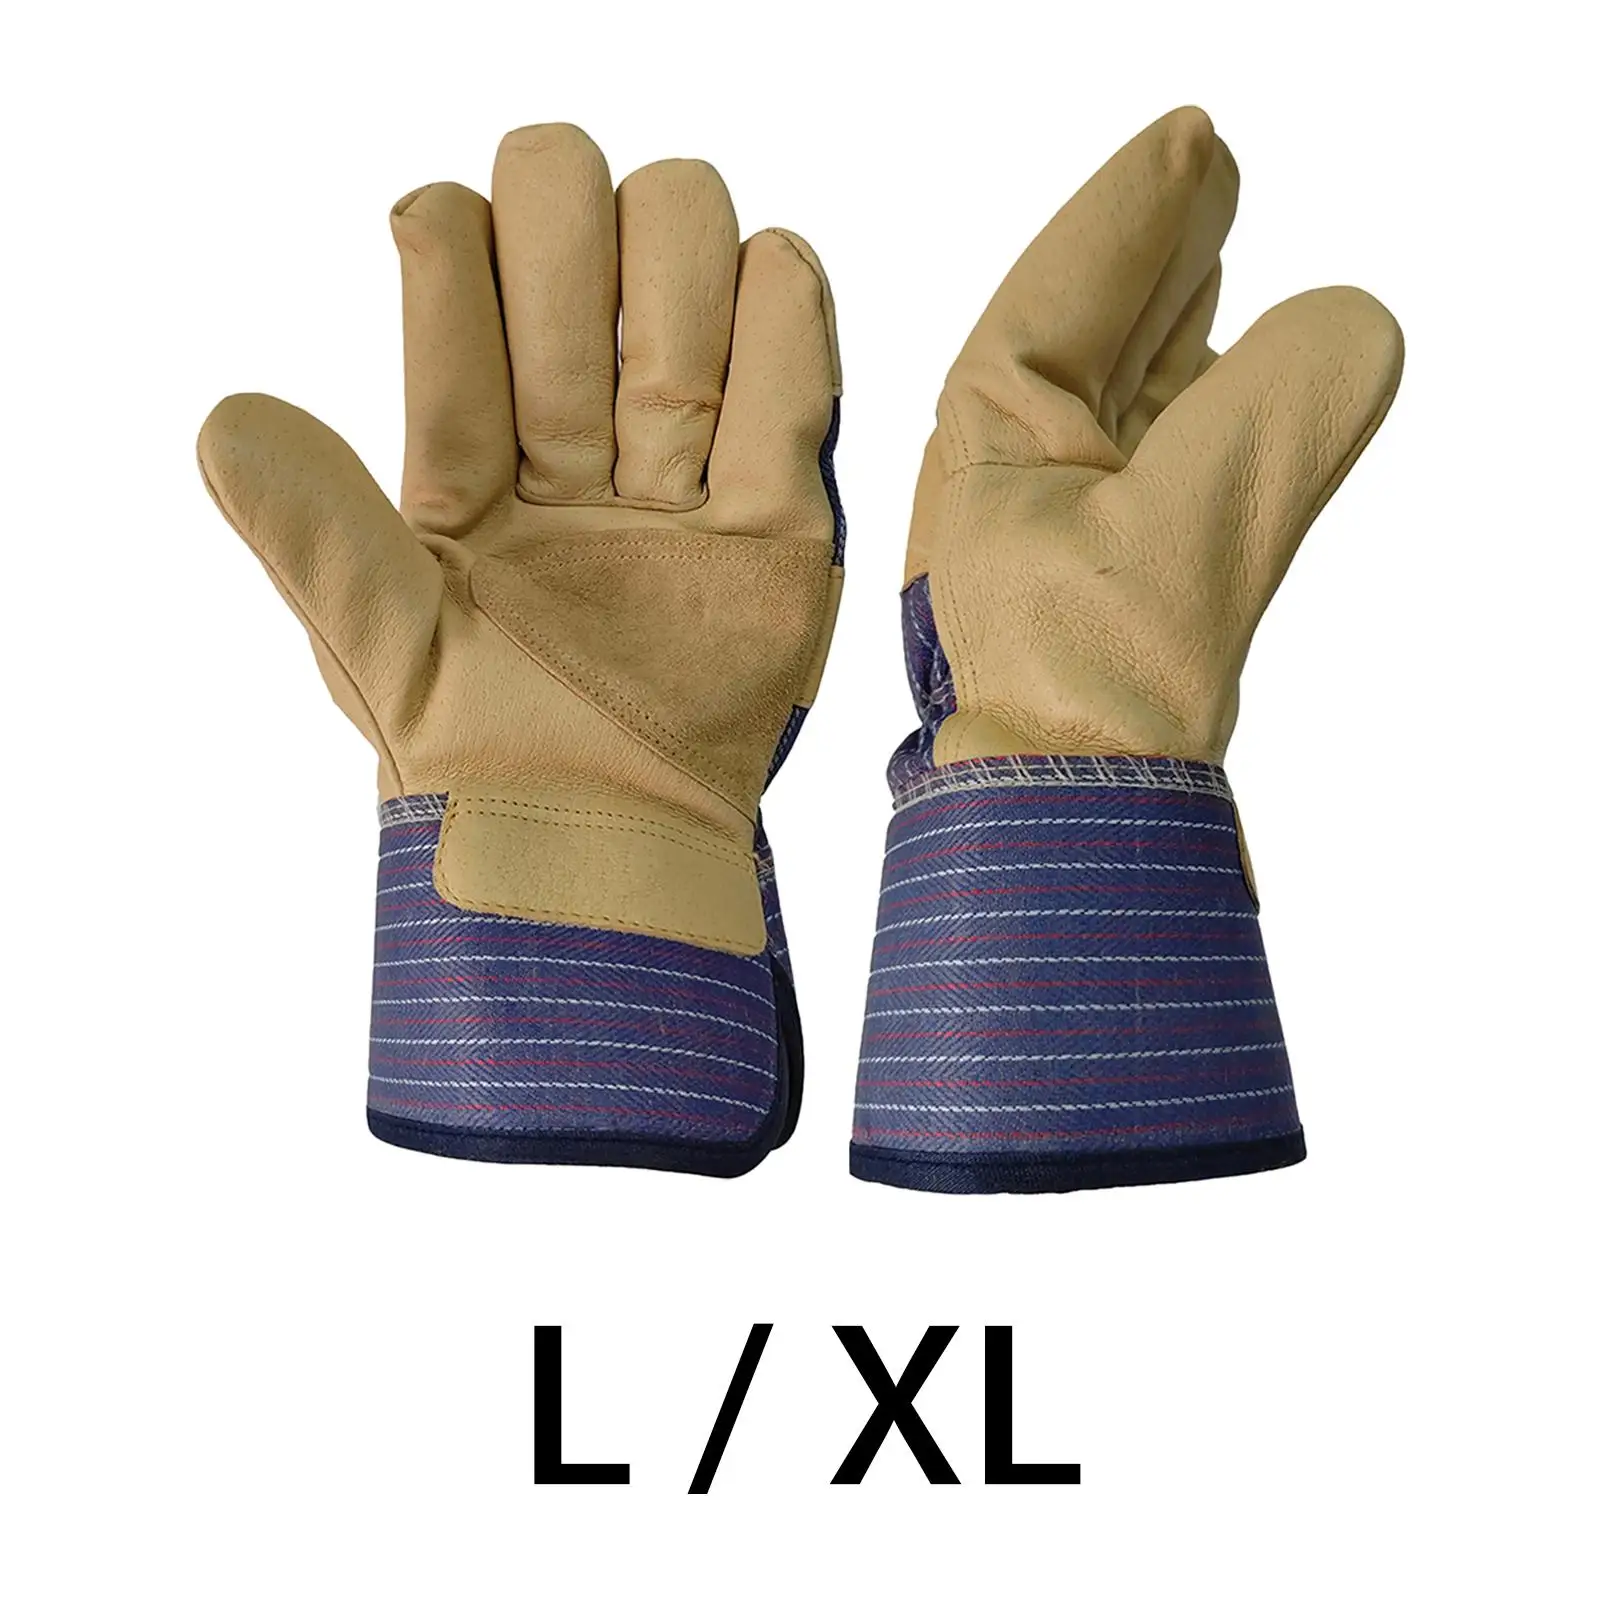 PU Leather Welding Gloves Heavy Duty with Reinforced Palm Durable Protective Gloves Welding Accessories for Stove Oven Baking